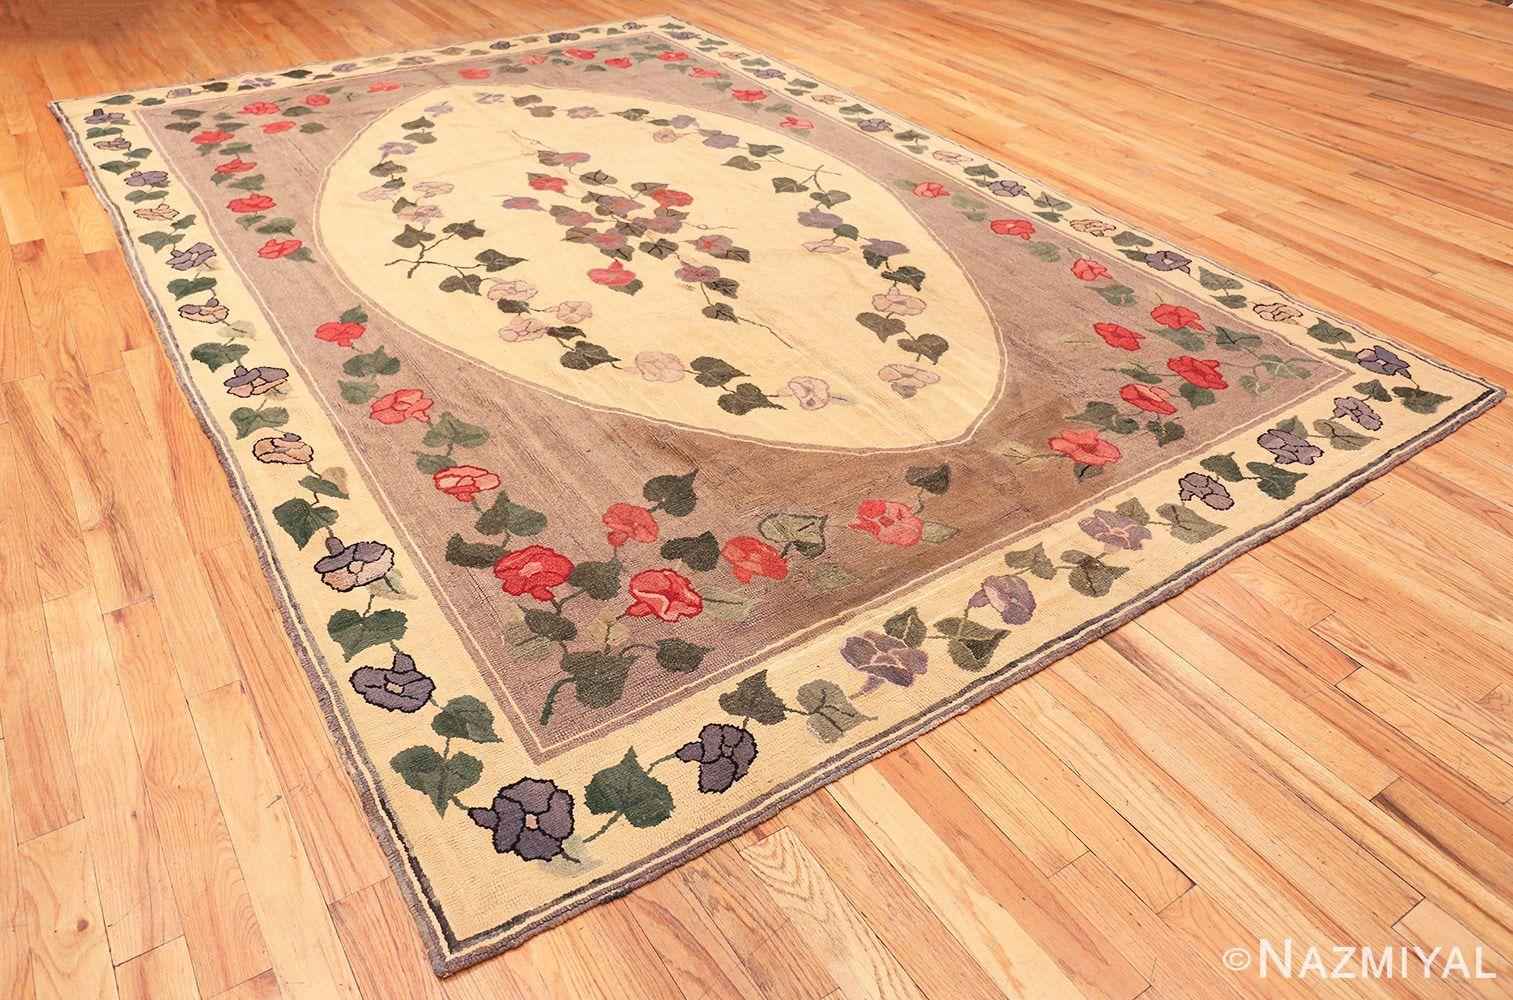 Antique American Hooked Rug, Country of Origin: America, Circa Date: 1920's. Size: 8 ft 2 in x 12 ft 6 in (2.49 m x 3.81 m)

A tableau of gorgeous morning glories spreads over this antique American rug. Red, white and blue flowers rest within the